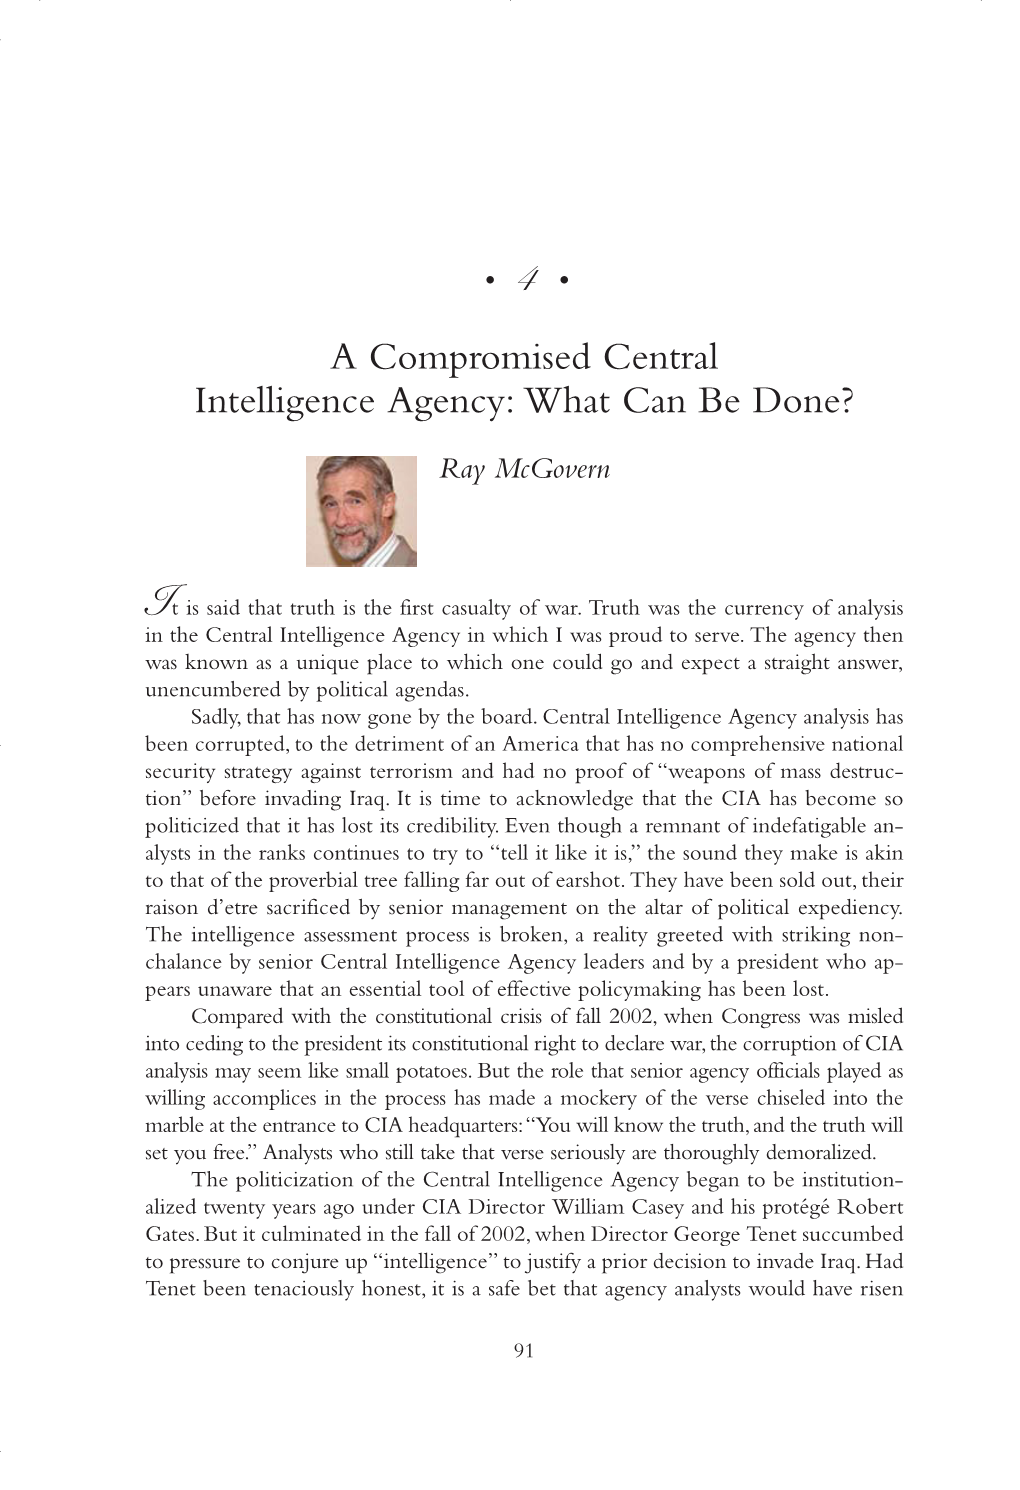 A Compromised Central Intelligence Agency: What Can Be Done?